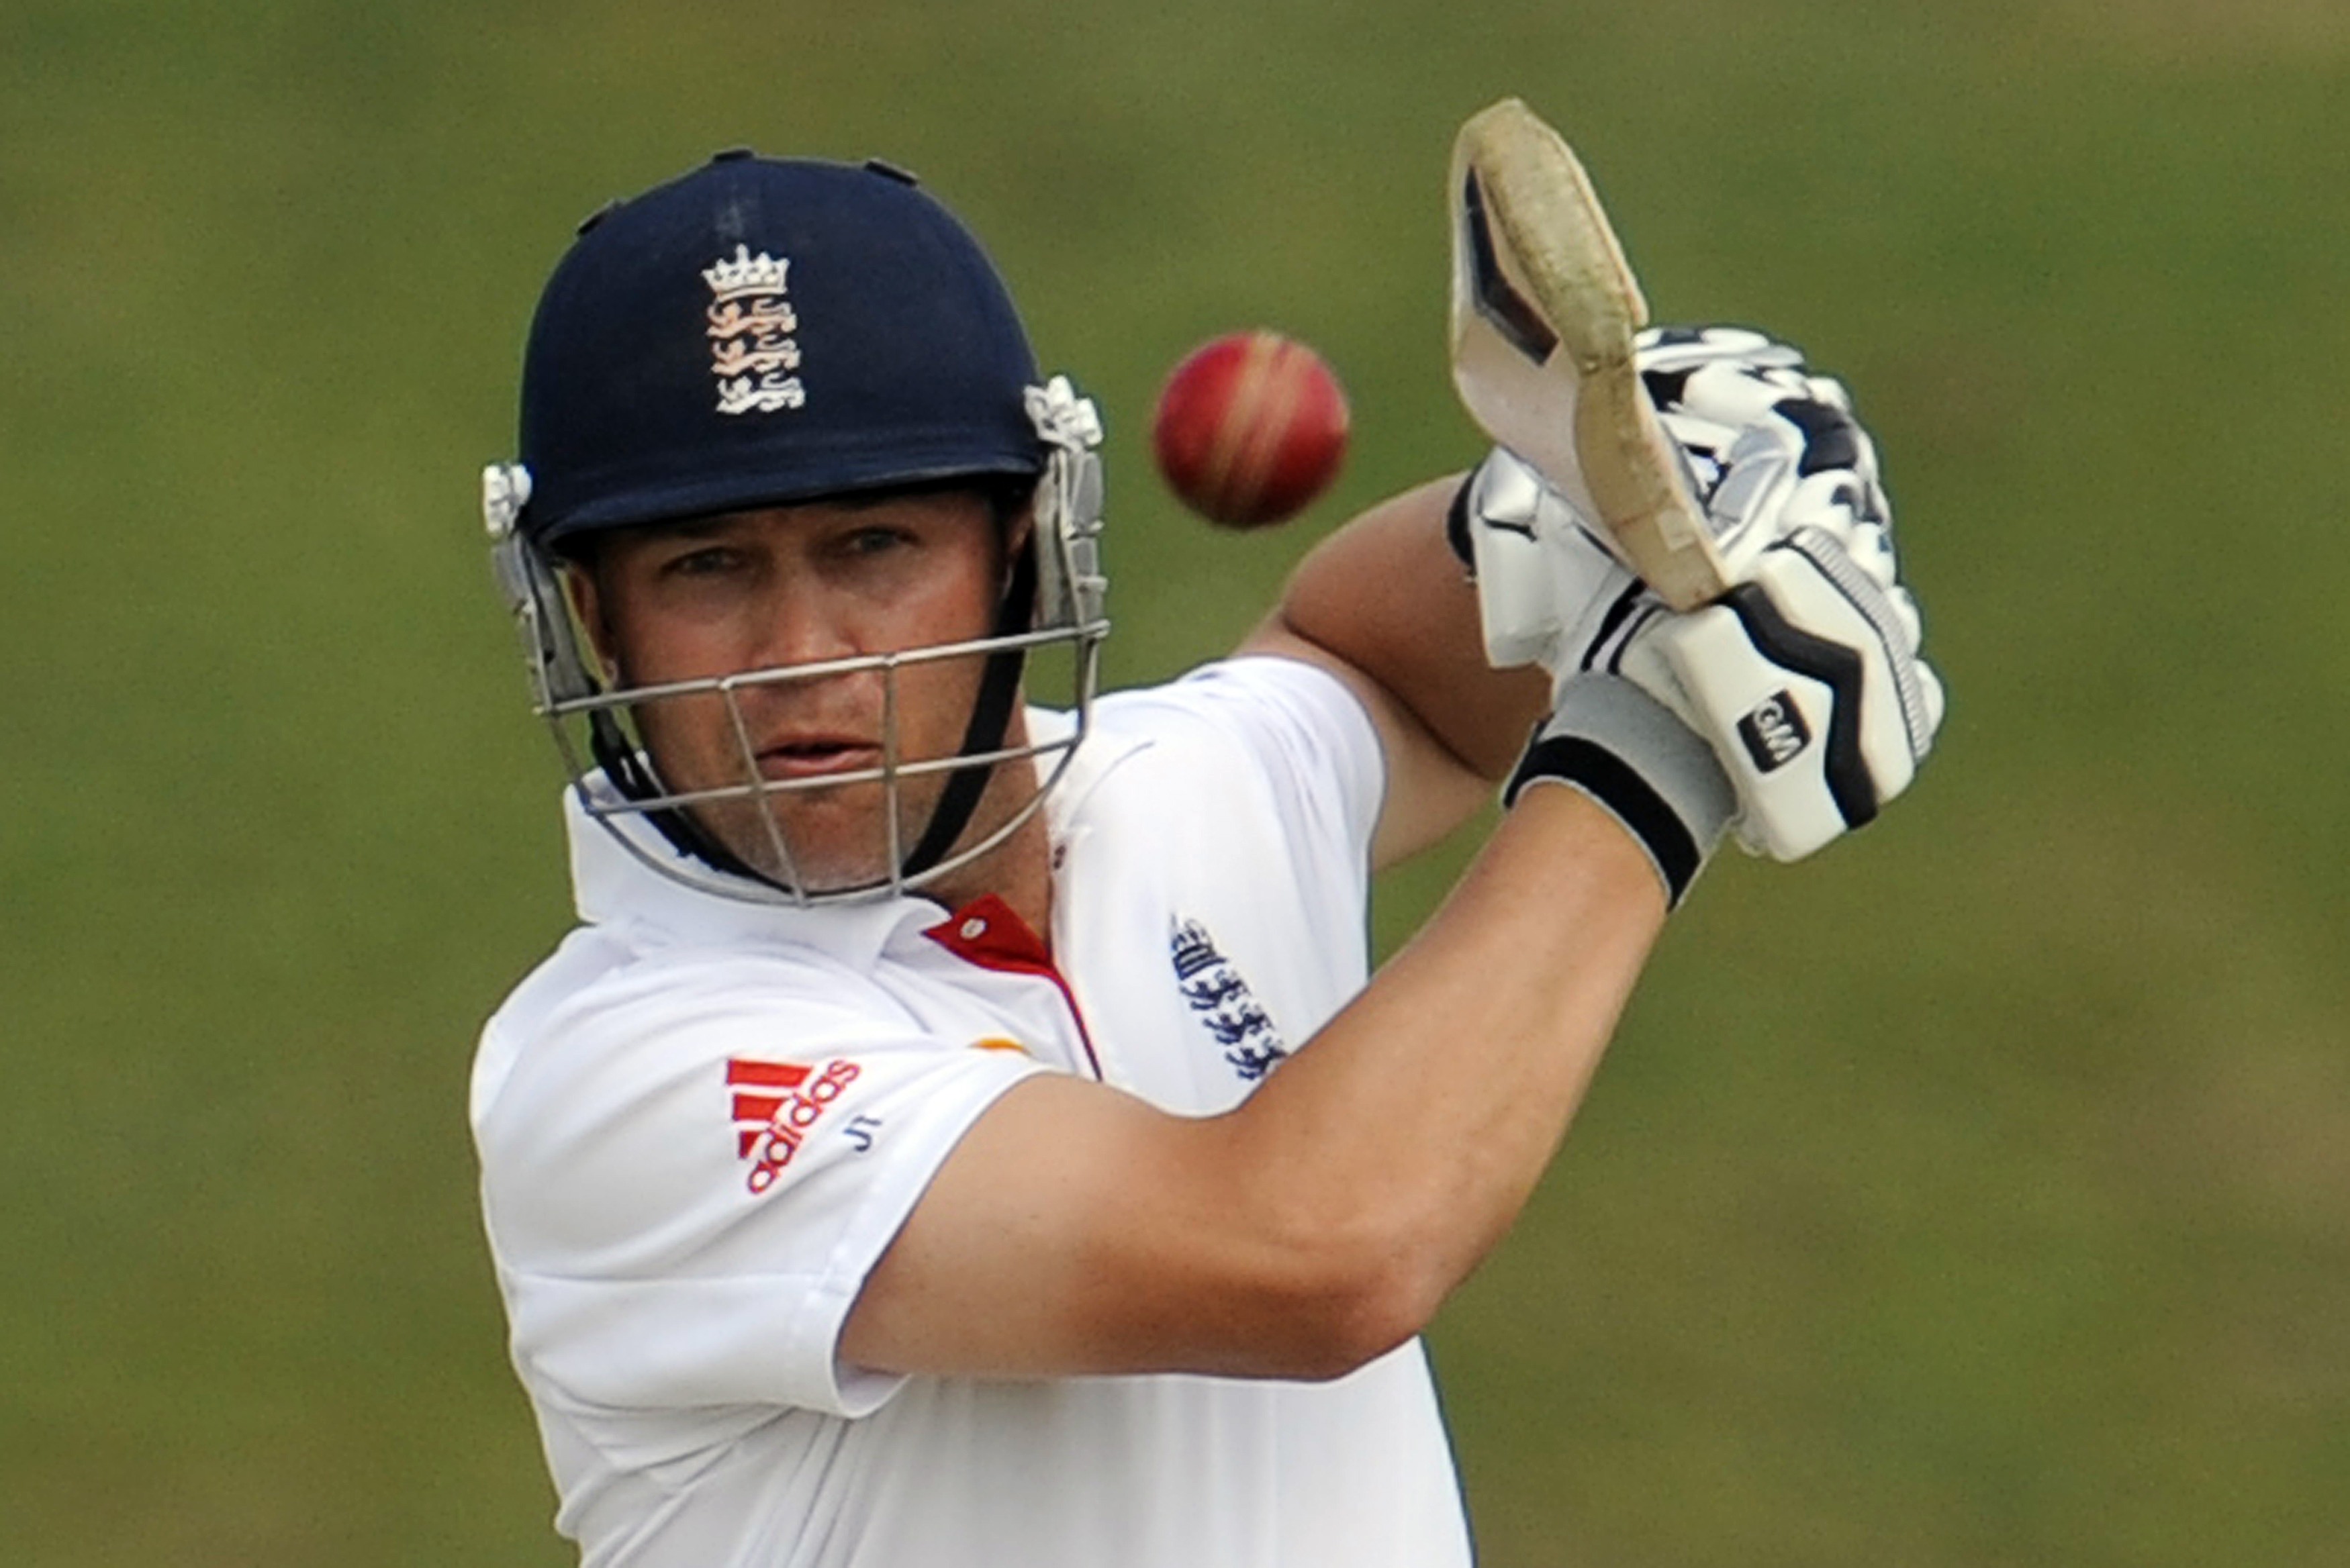 Jonathan Trott is ready to come back to cricket, six months after he abruptly left the England squad during the Ashes tour of Australia. Photo: Reuters